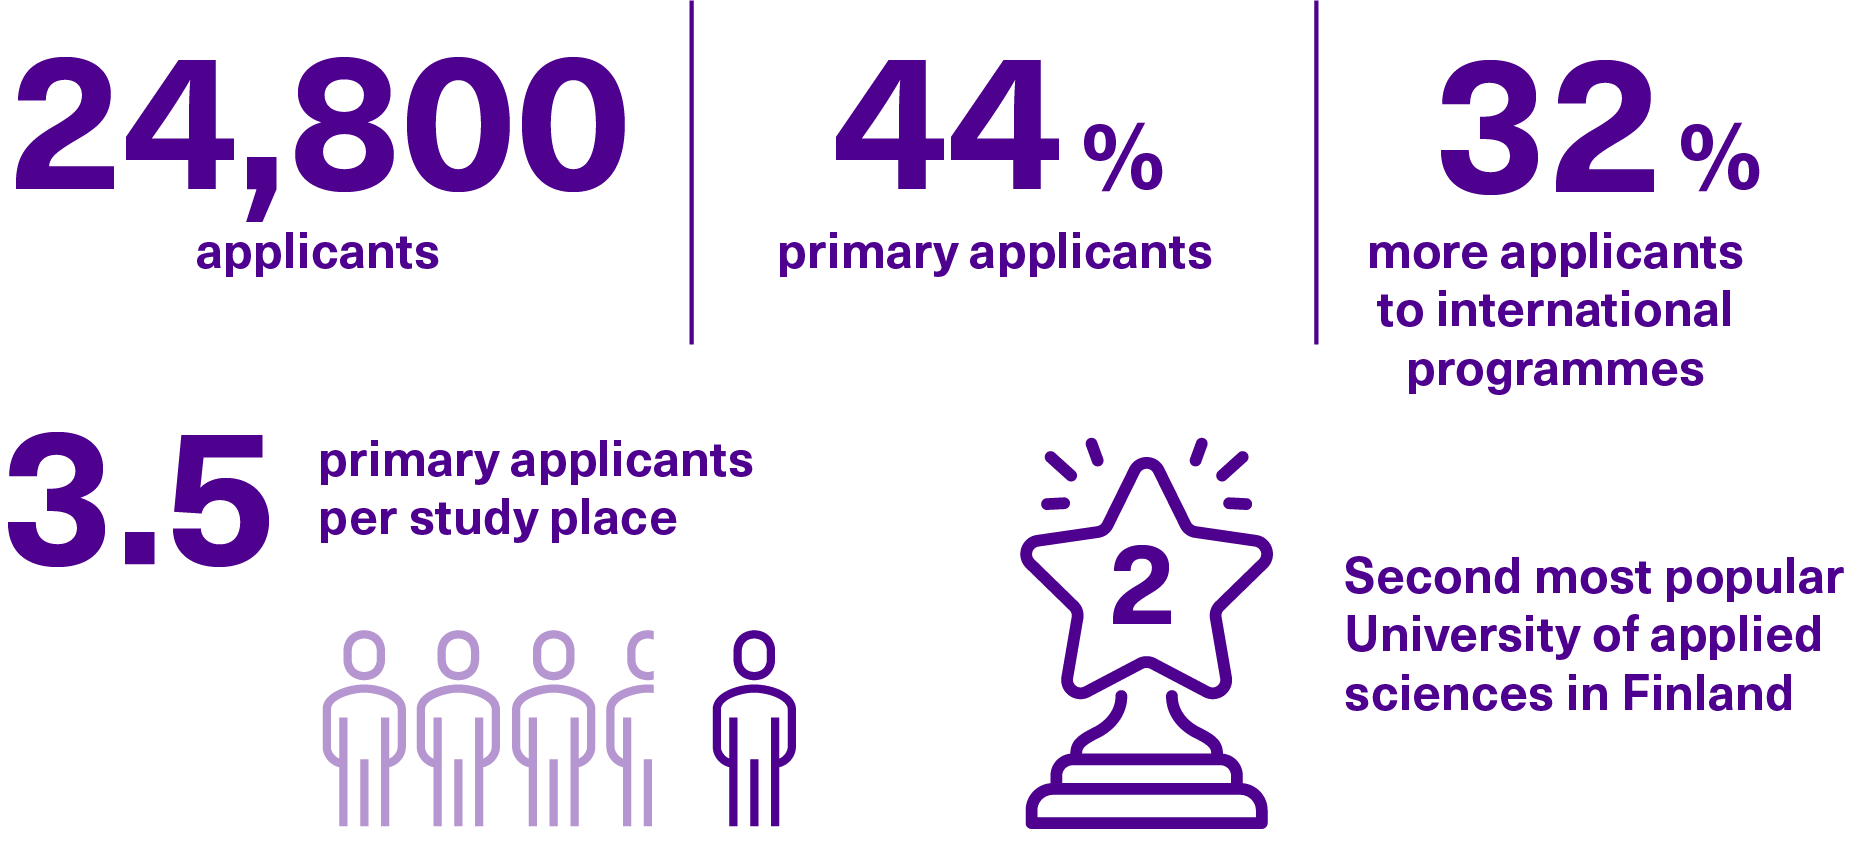 Statistics of applicants, primary applicants, increase of applicants to international programmes and primary applicant per study place